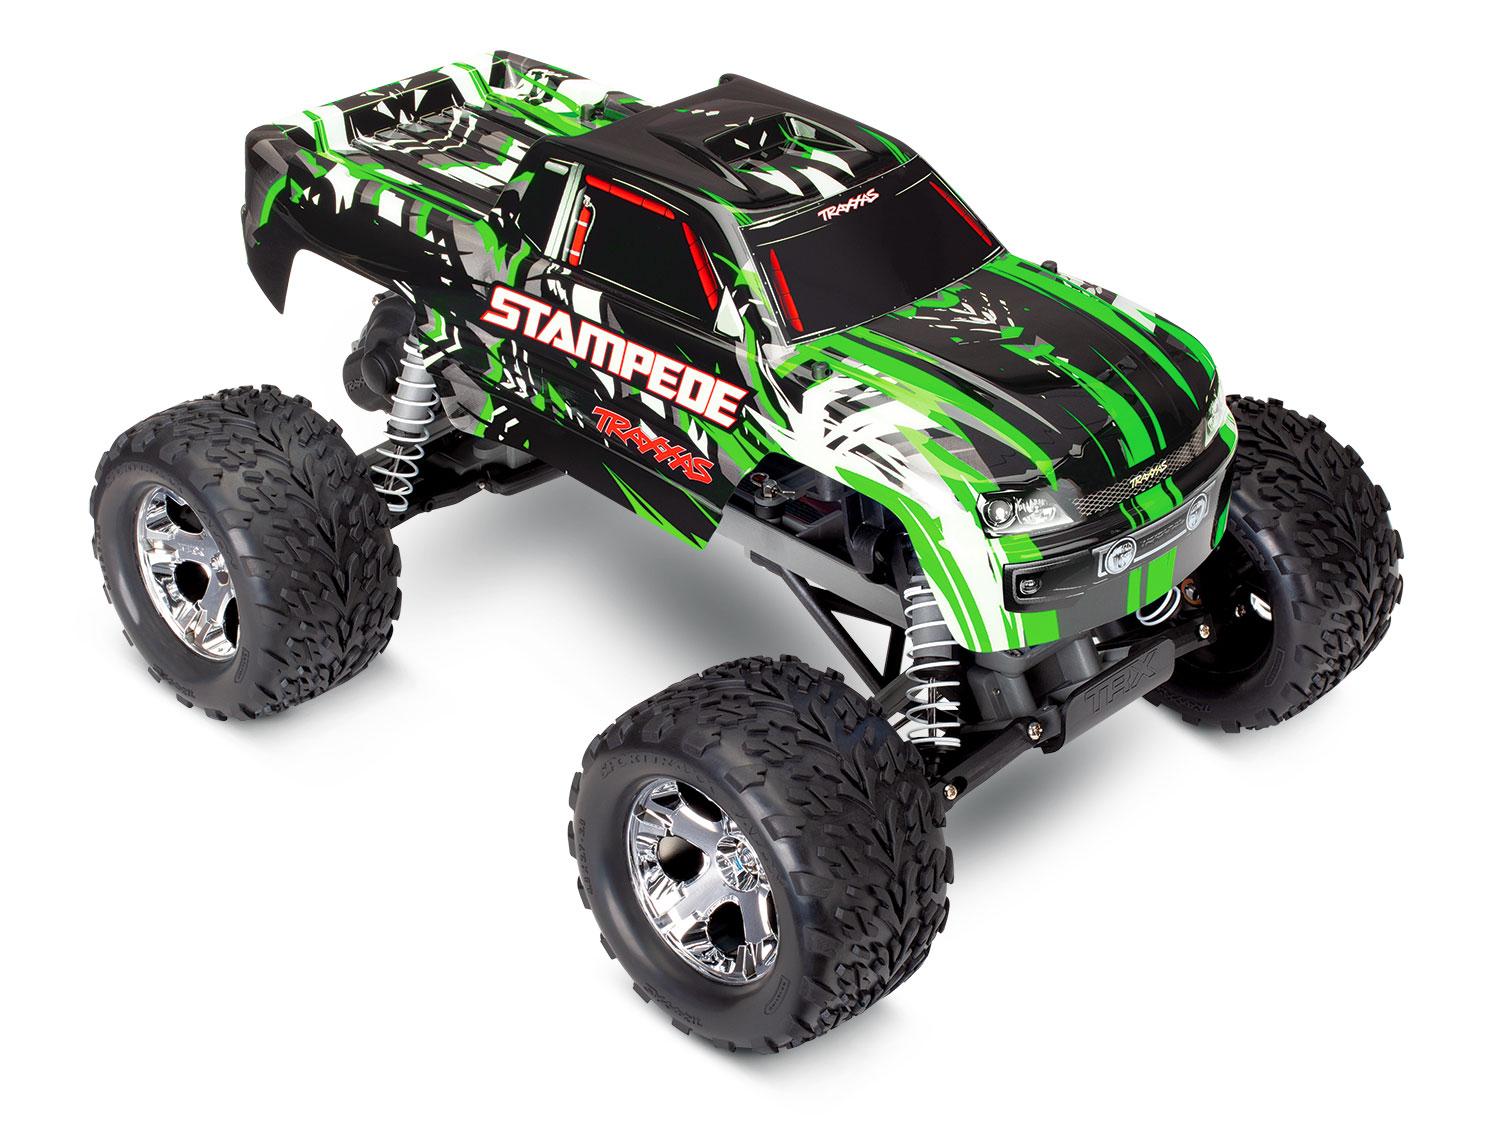 Traxxas Rc Cars For Sale Cheap: The Pros and Cons of Buying a Used Traxxas RC Car